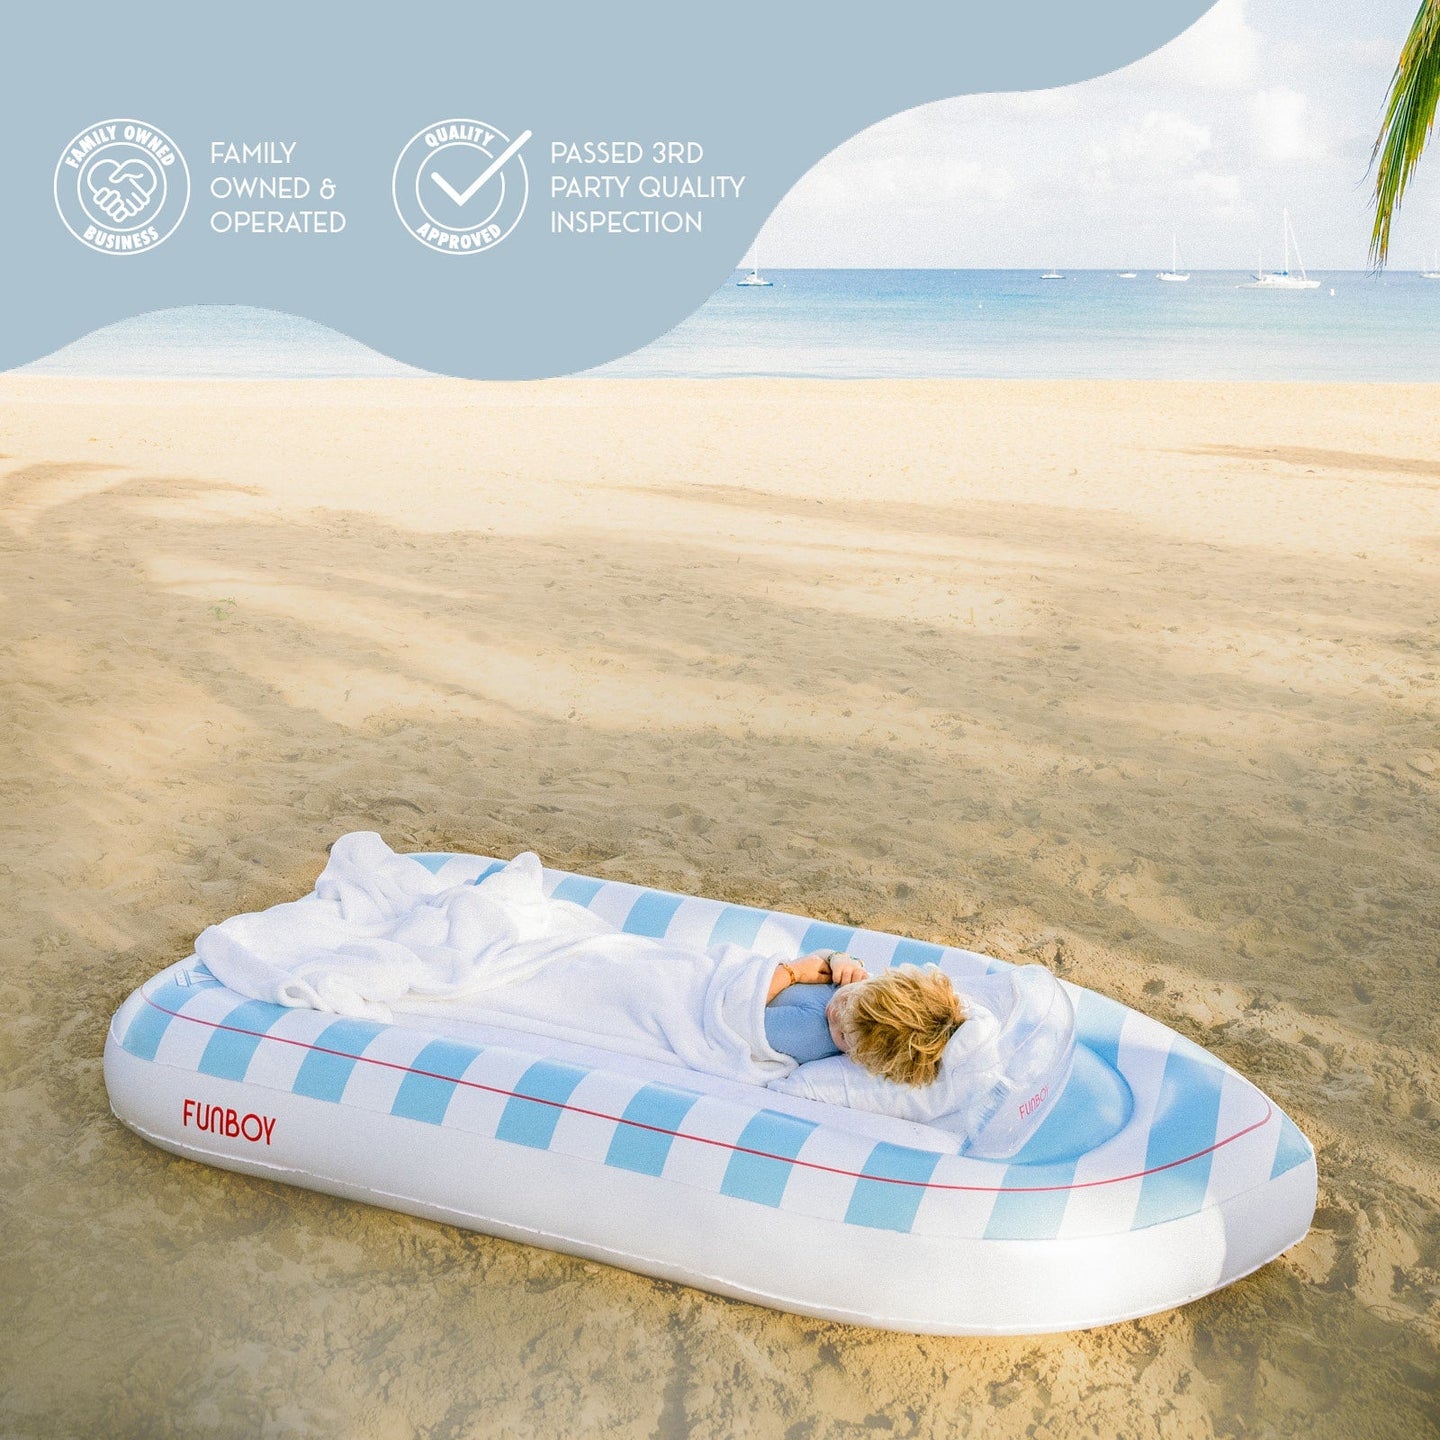 Kids Air Mattress - Classic Speed Boat Sleepover Bed